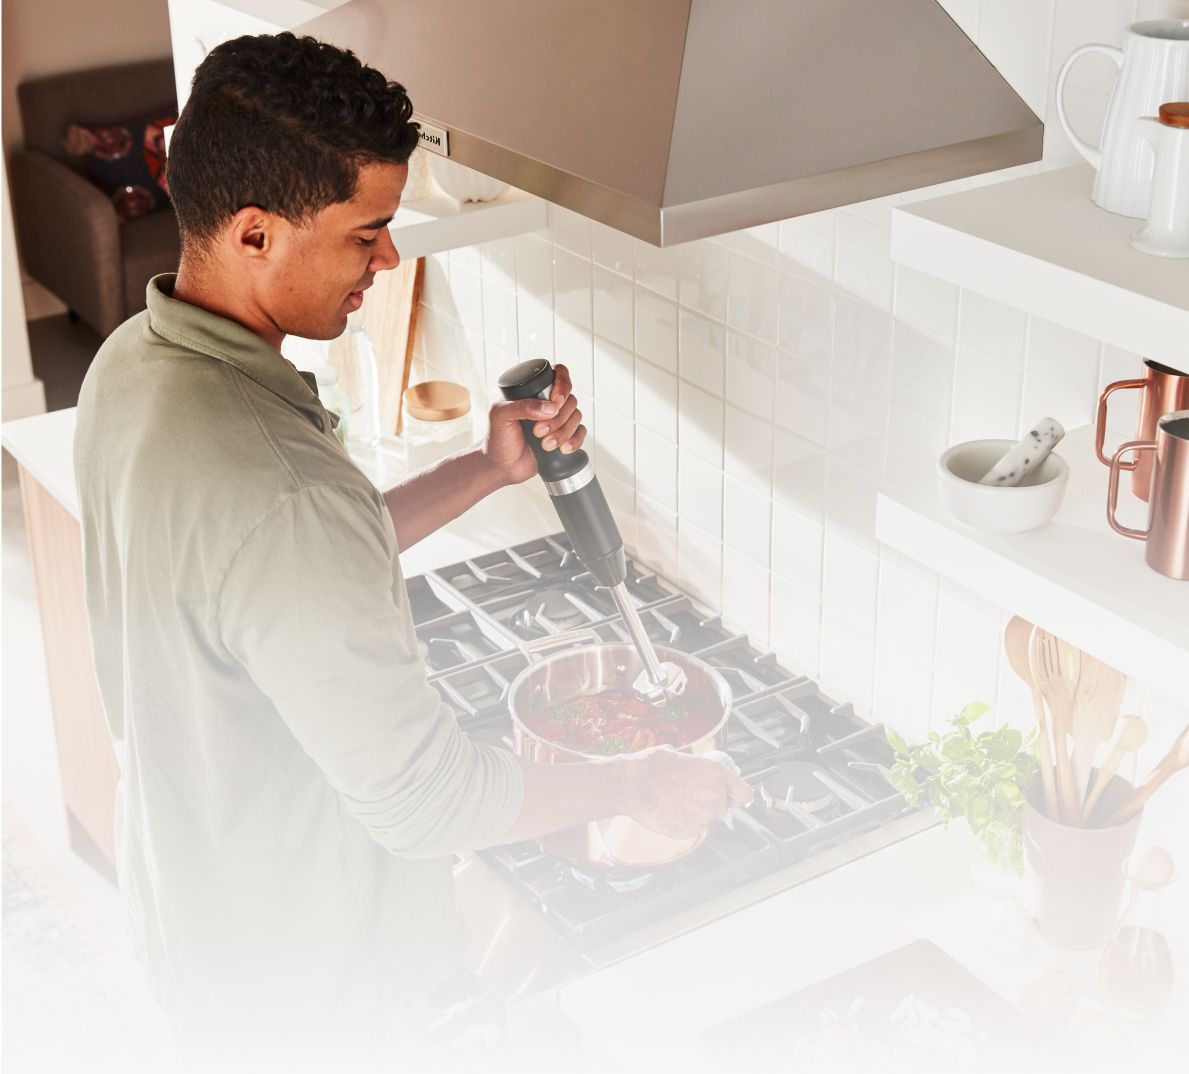 Cooking with a KitchenAid® Range and Microwave.